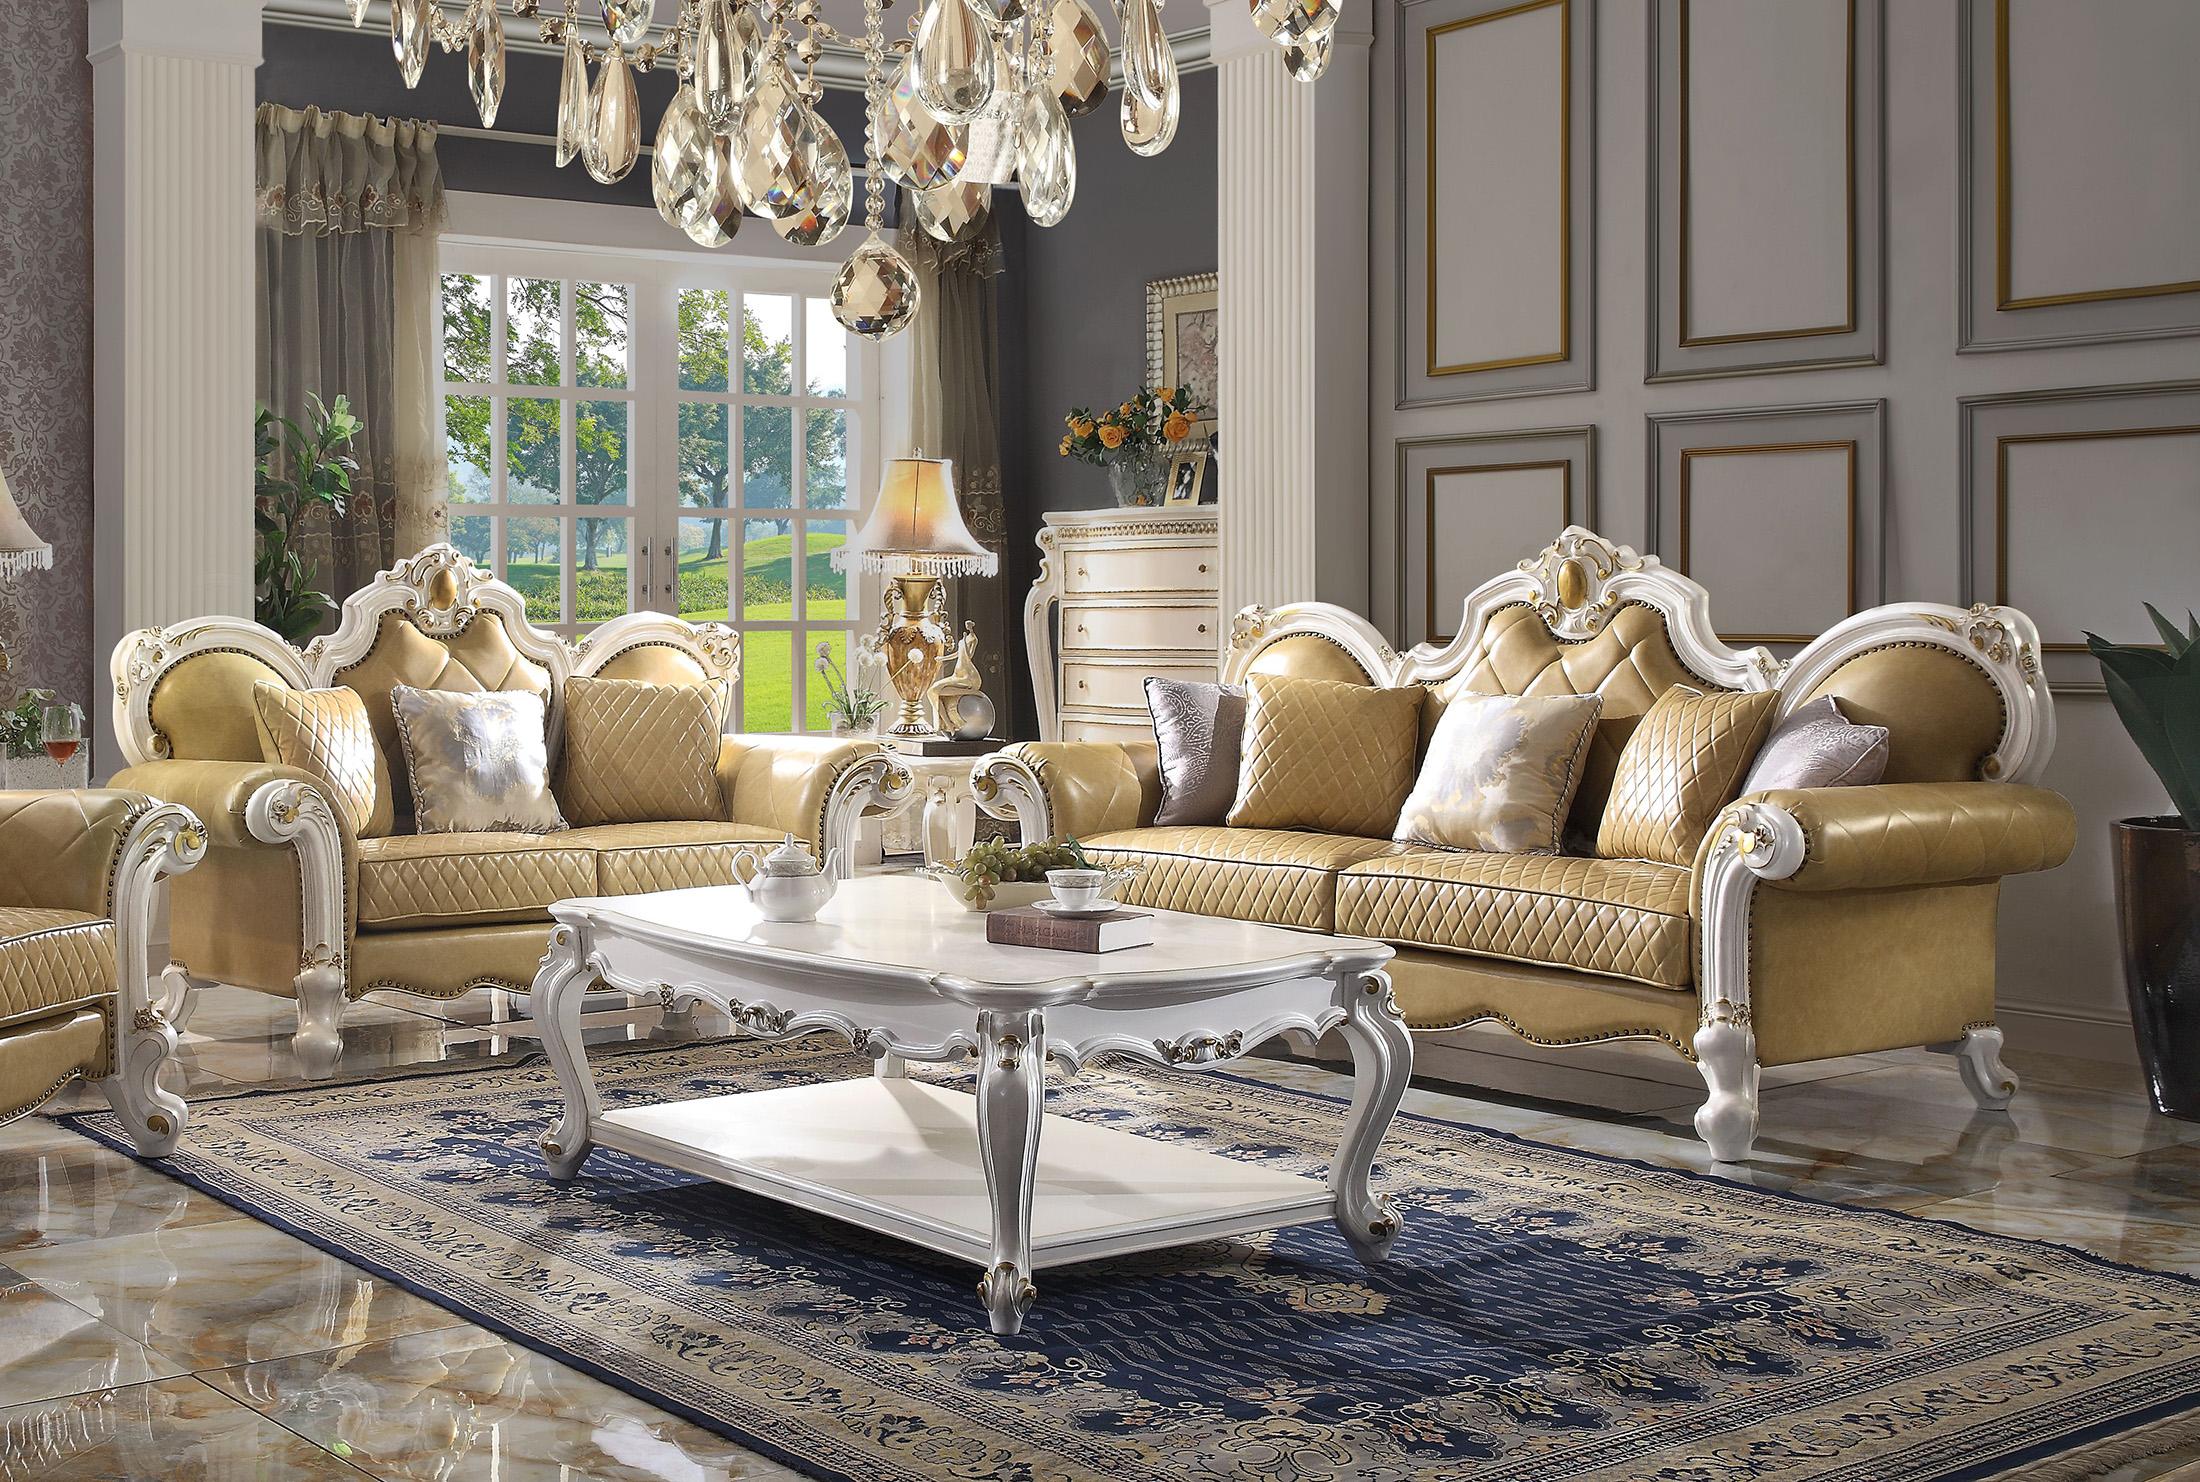 Classic, Traditional Sofa Set Picardy 58210 58210-Set-2 Picardy in Pearl, Antique, Yellow PU